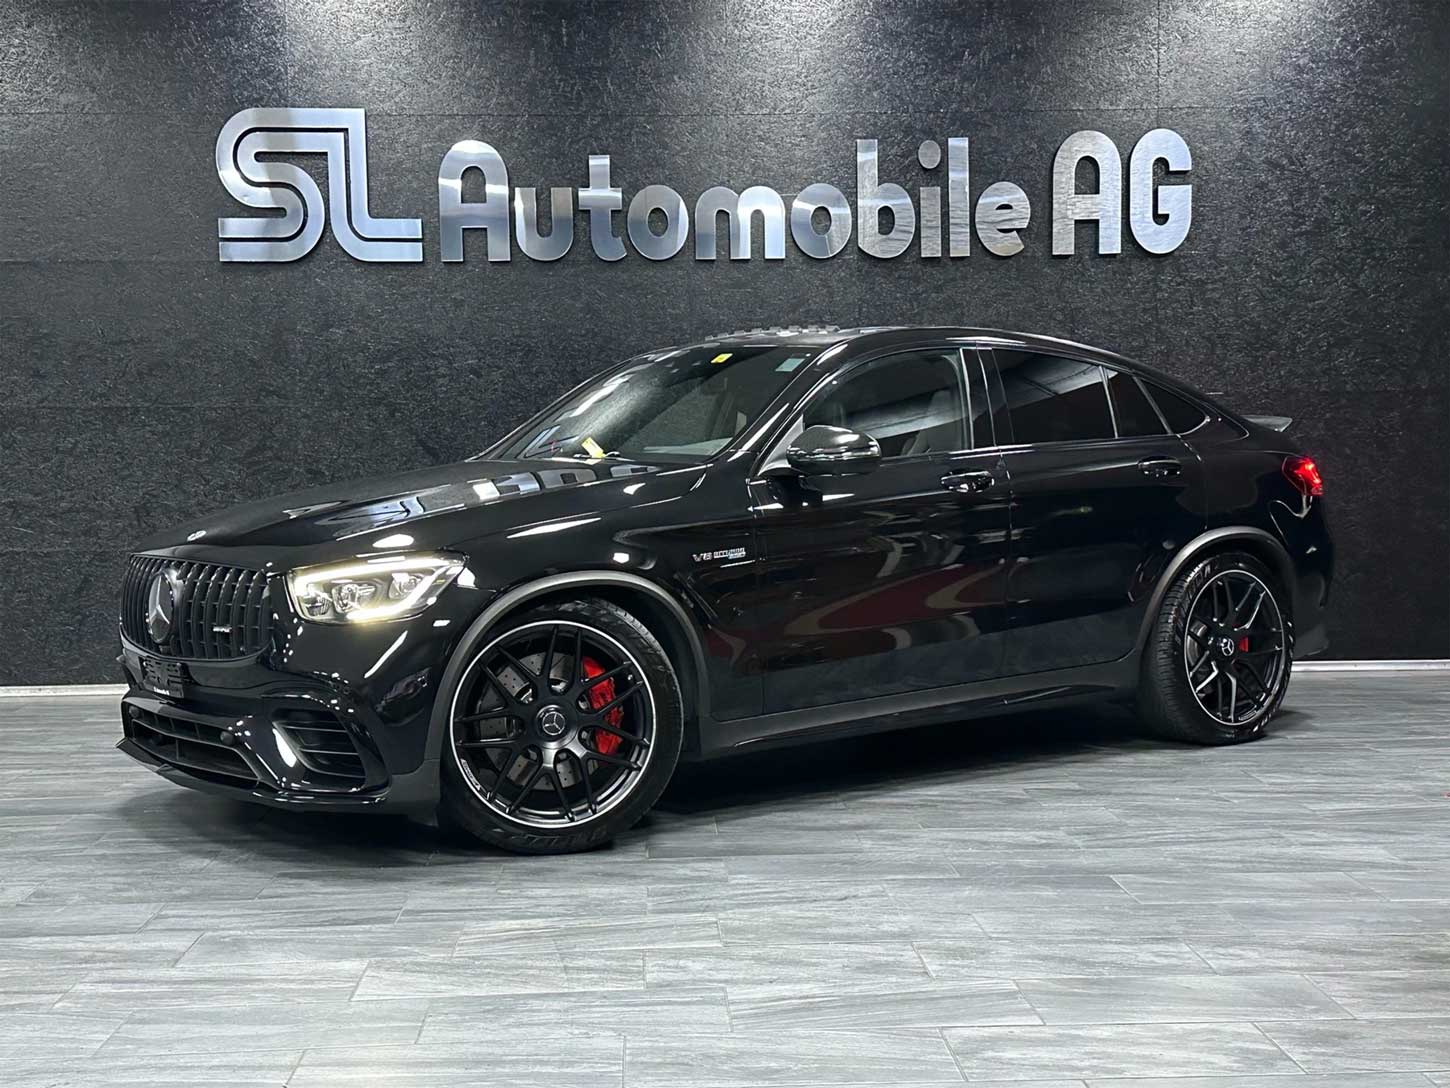 <a href="https://www.autoscout24.ch/de/d/mercedes-benz-glc-coupe-63-s-amg-4matic-9g-tronic-11109381" style="color: white; text-decoration: none;" onmouseover="this.style.color='yellow'" onmouseout="this.style.color='white'">MERCEDES-BENZ GLC Coupé 63 S AMG 4Matic 9G-Tronic</a>